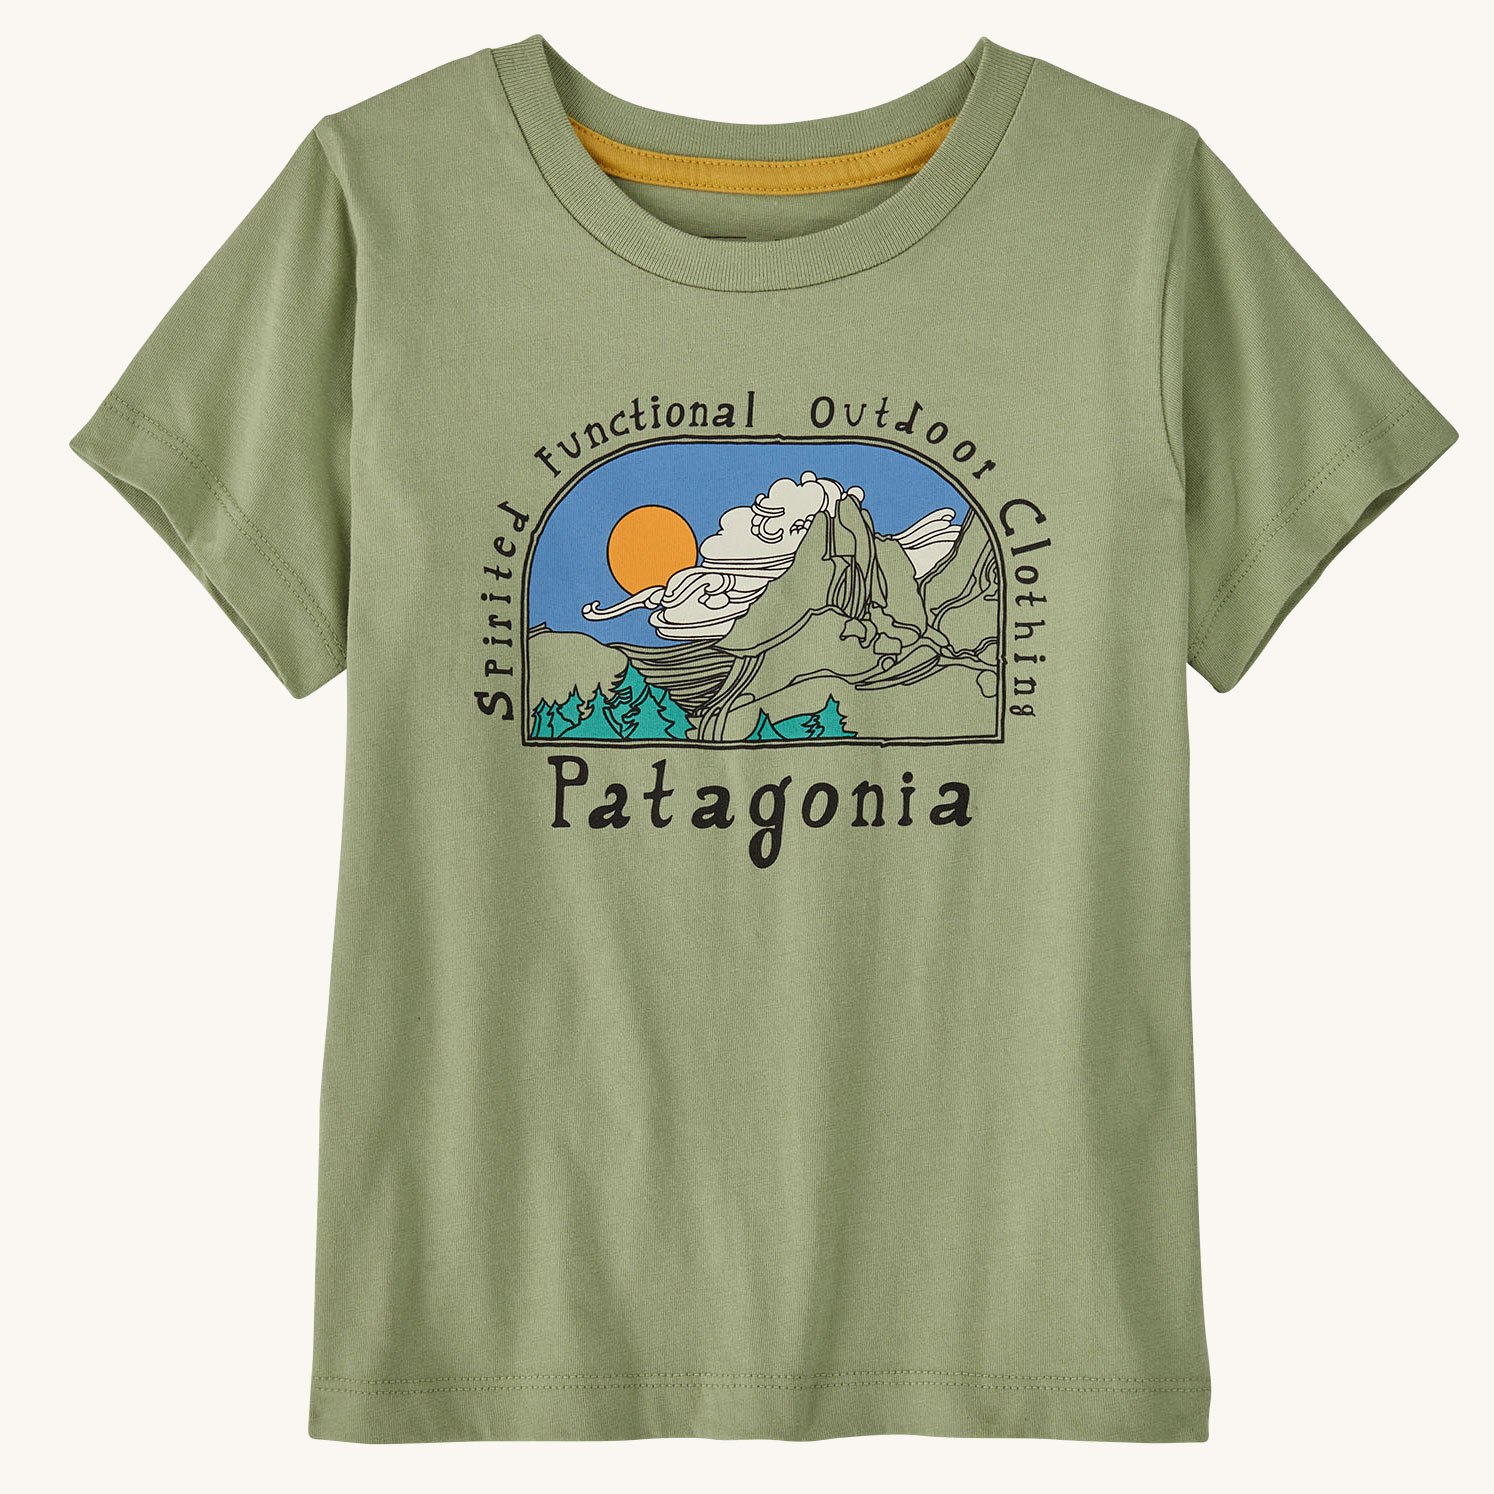 Recycled Cotton Fabric - Patagonia